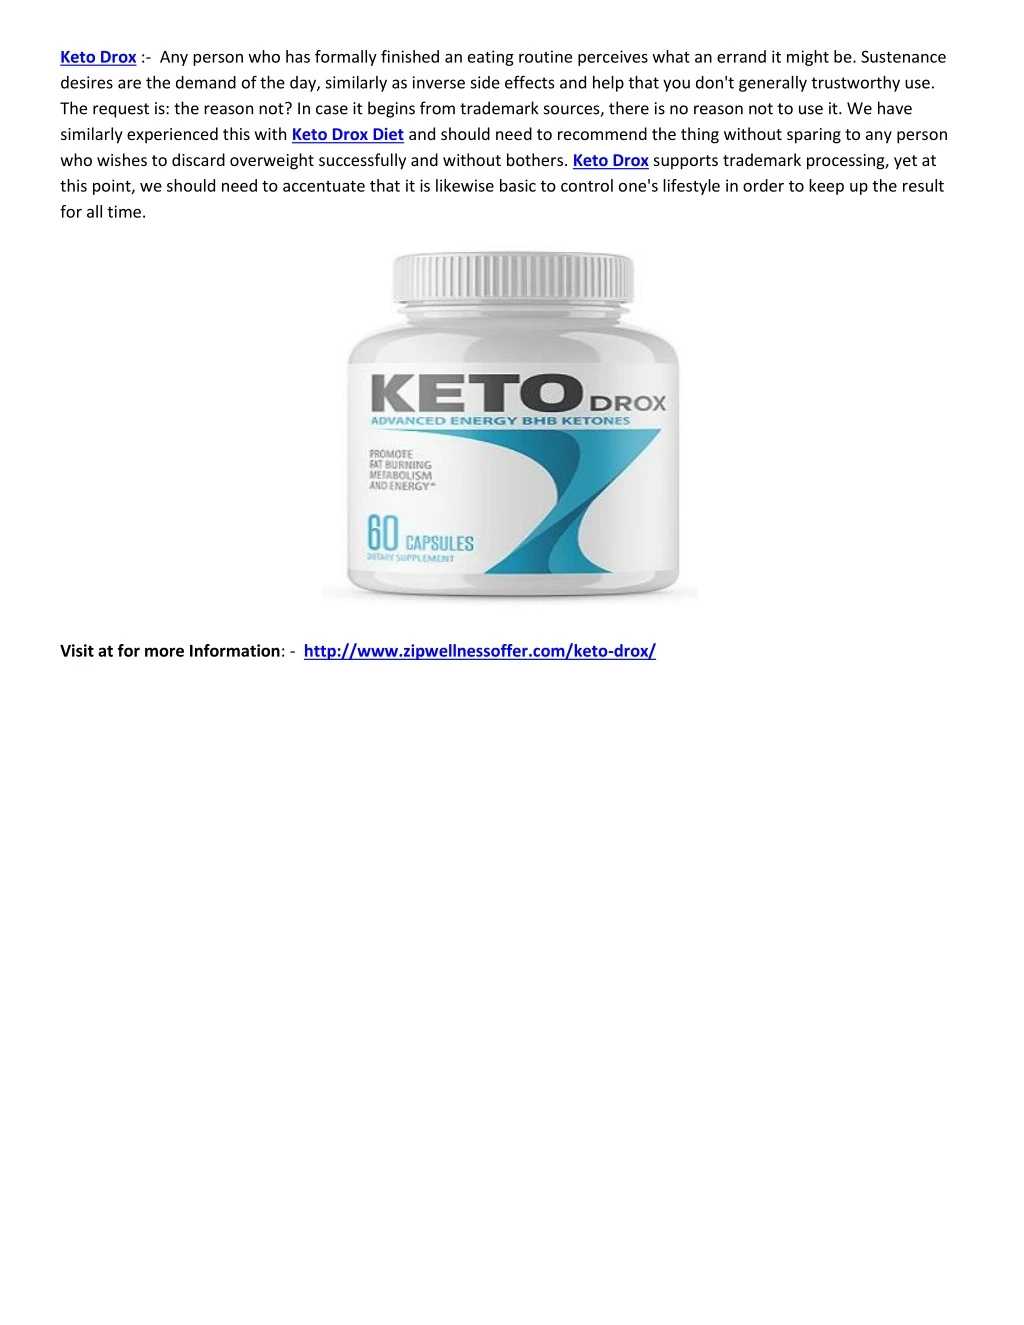 keto drox any person who has formally finished